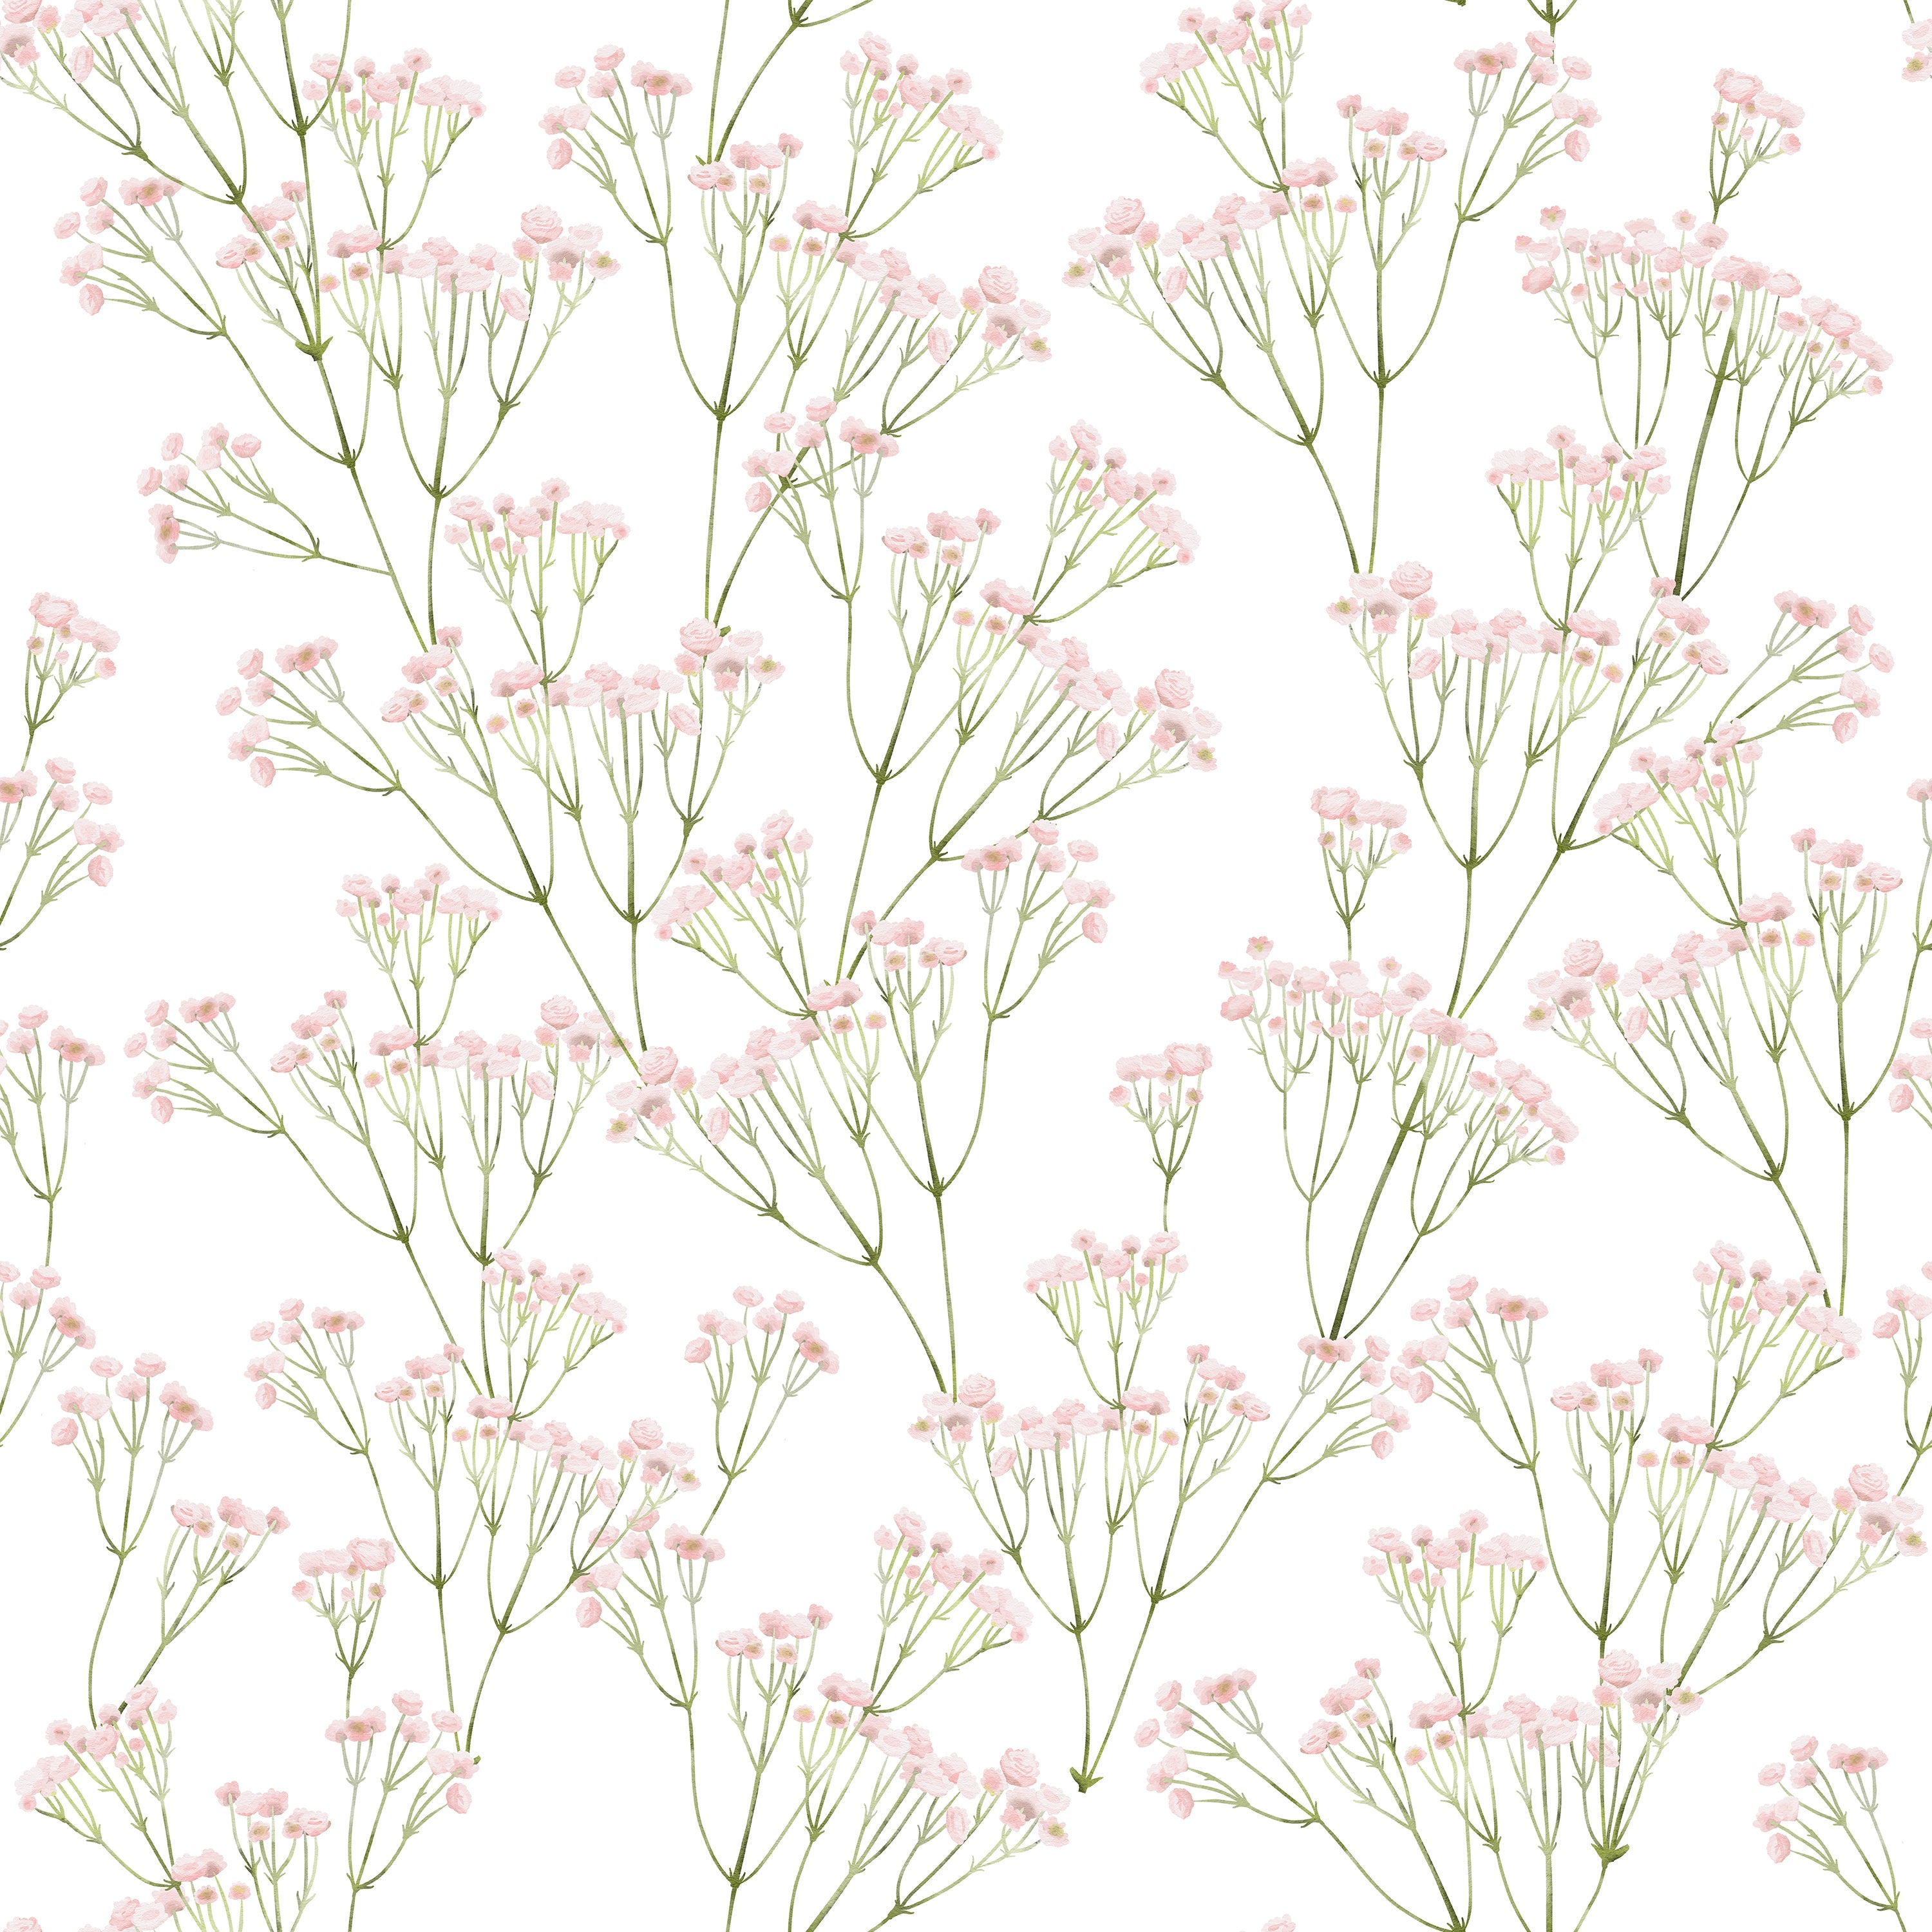 A delicate and detailed floral wallpaper featuring light pink blossoms clustered on thin green stems, dispersed evenly against a clean white background, conveying a fresh and airy botanical theme